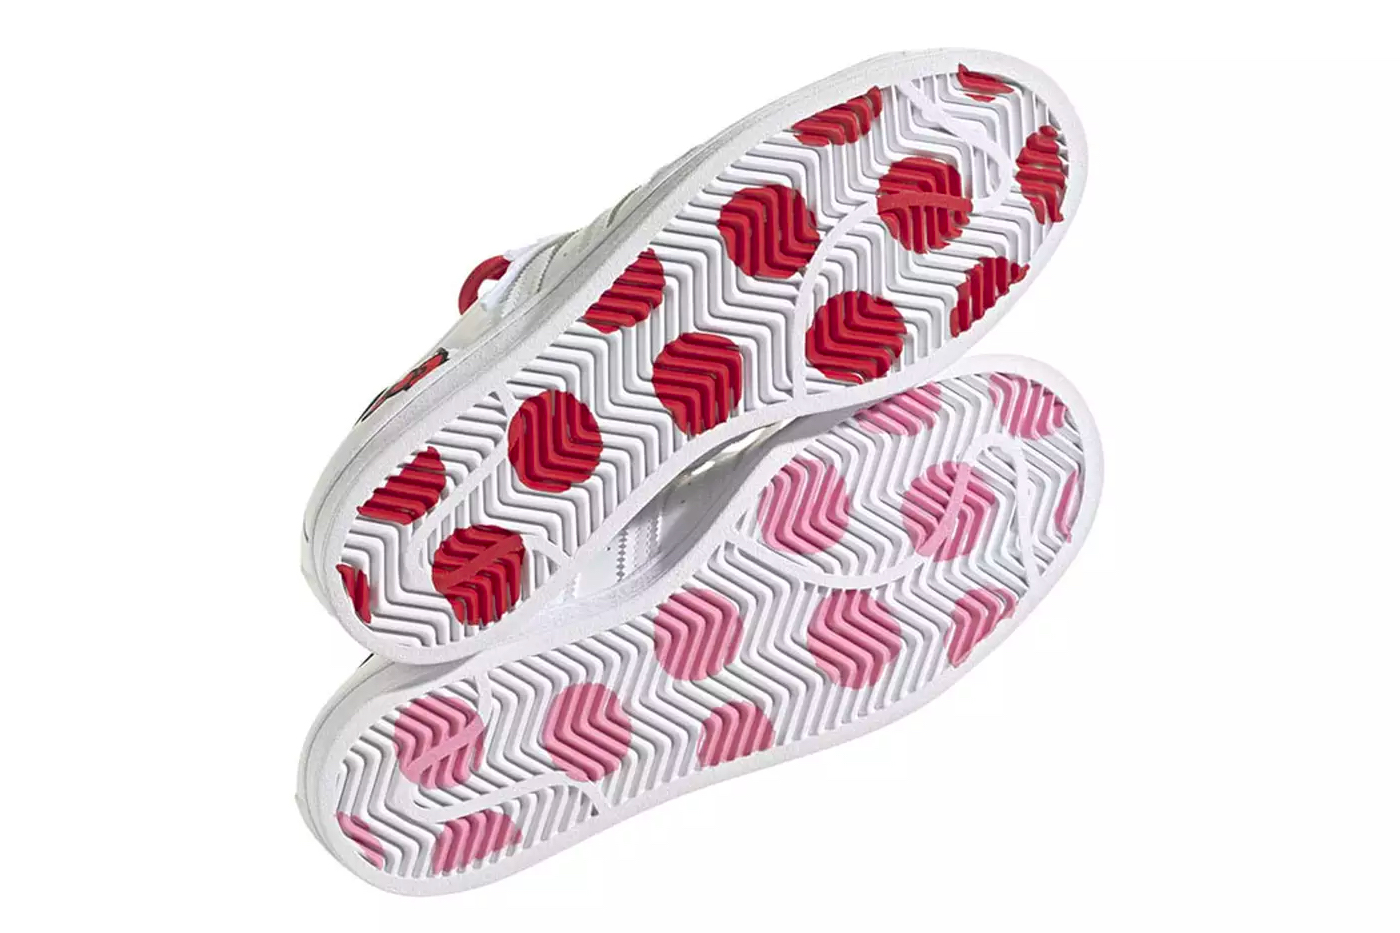 The Hello Kitty x Adidas Superstar Come In Mismatched Laces